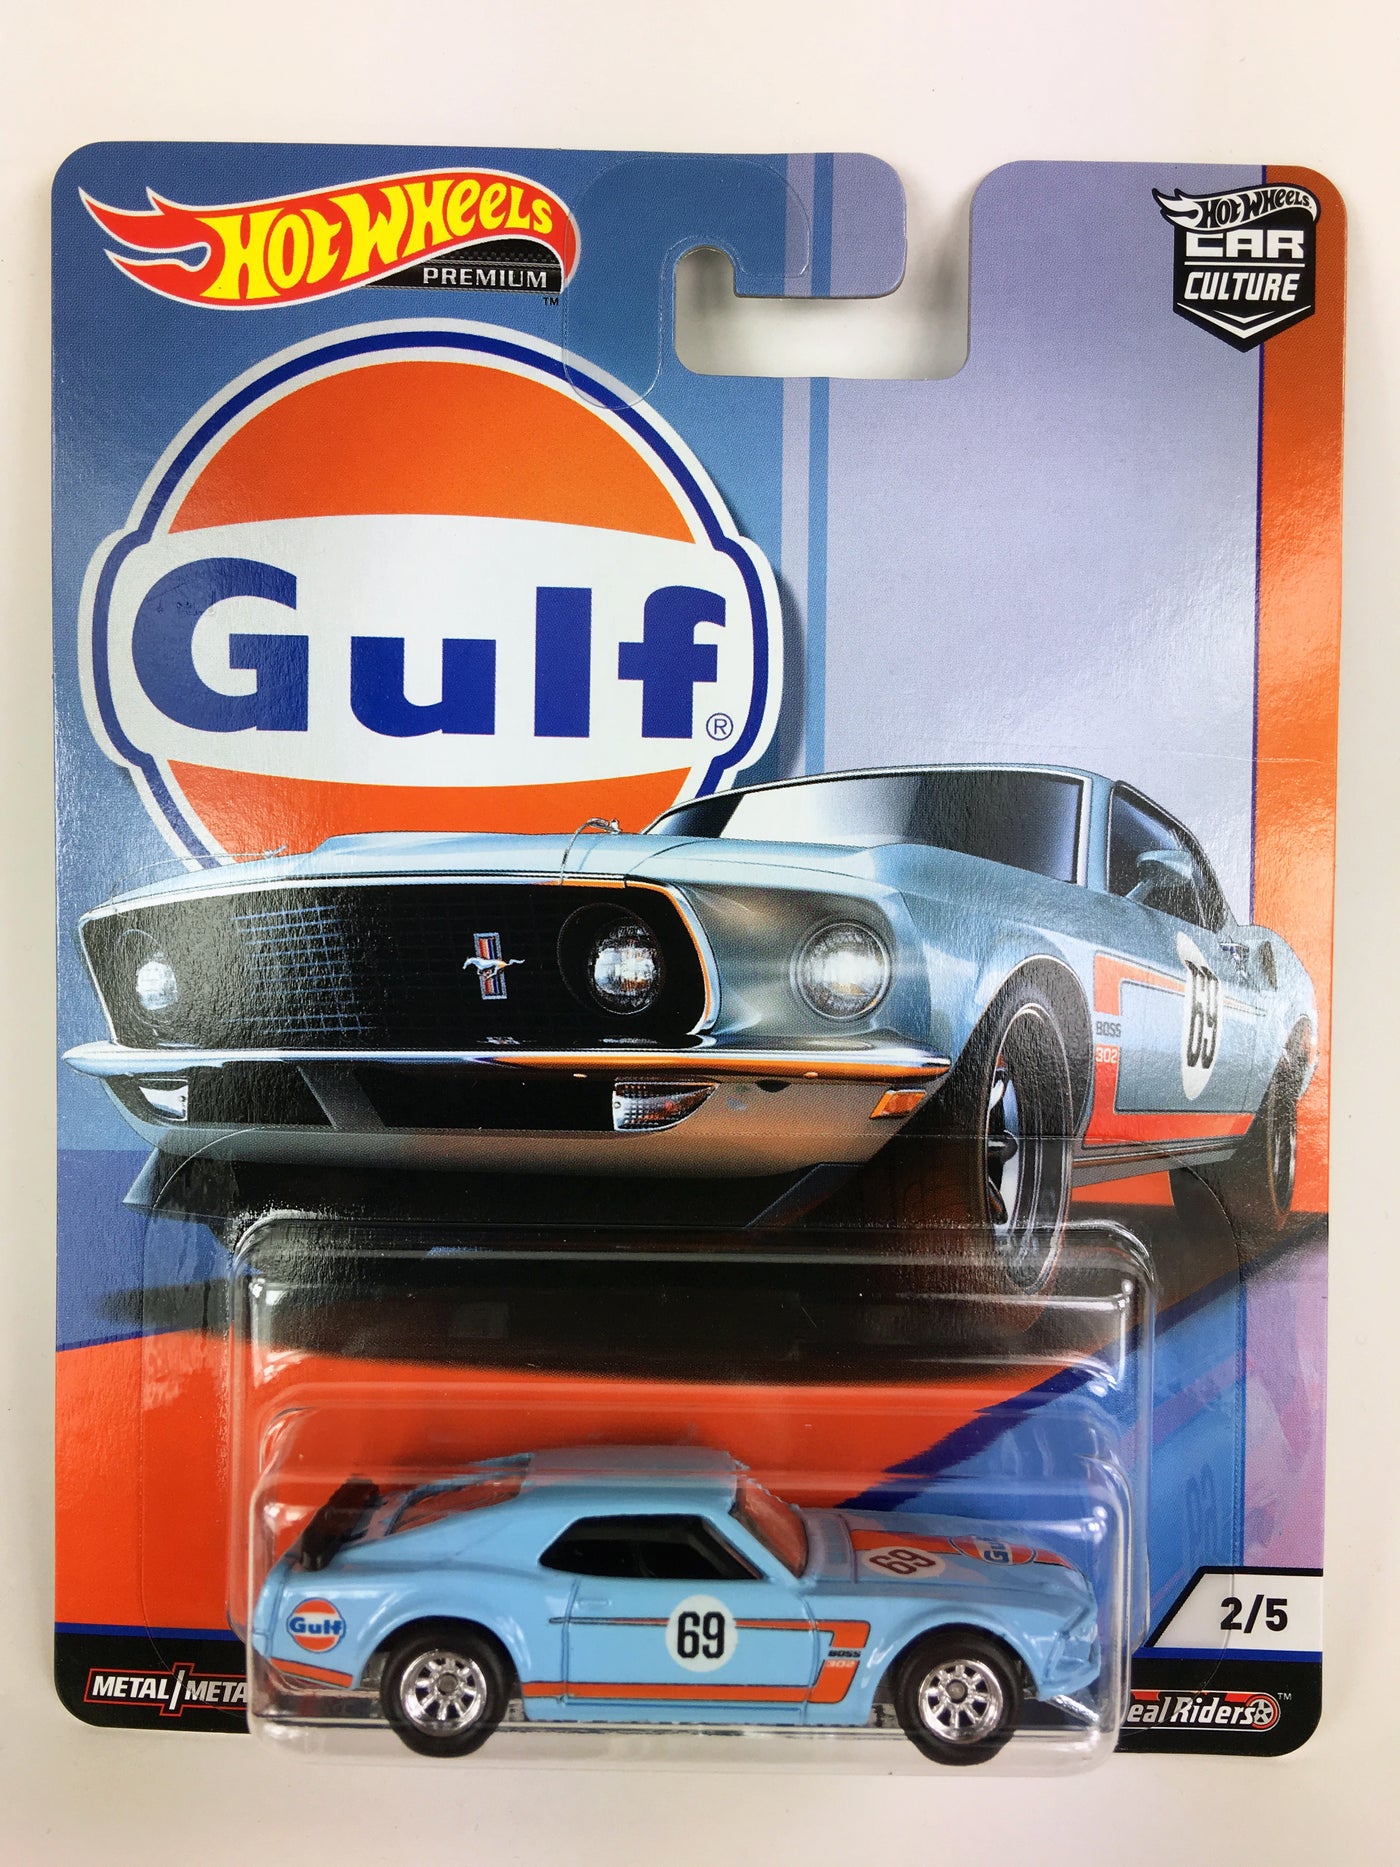 hot wheels red mustang